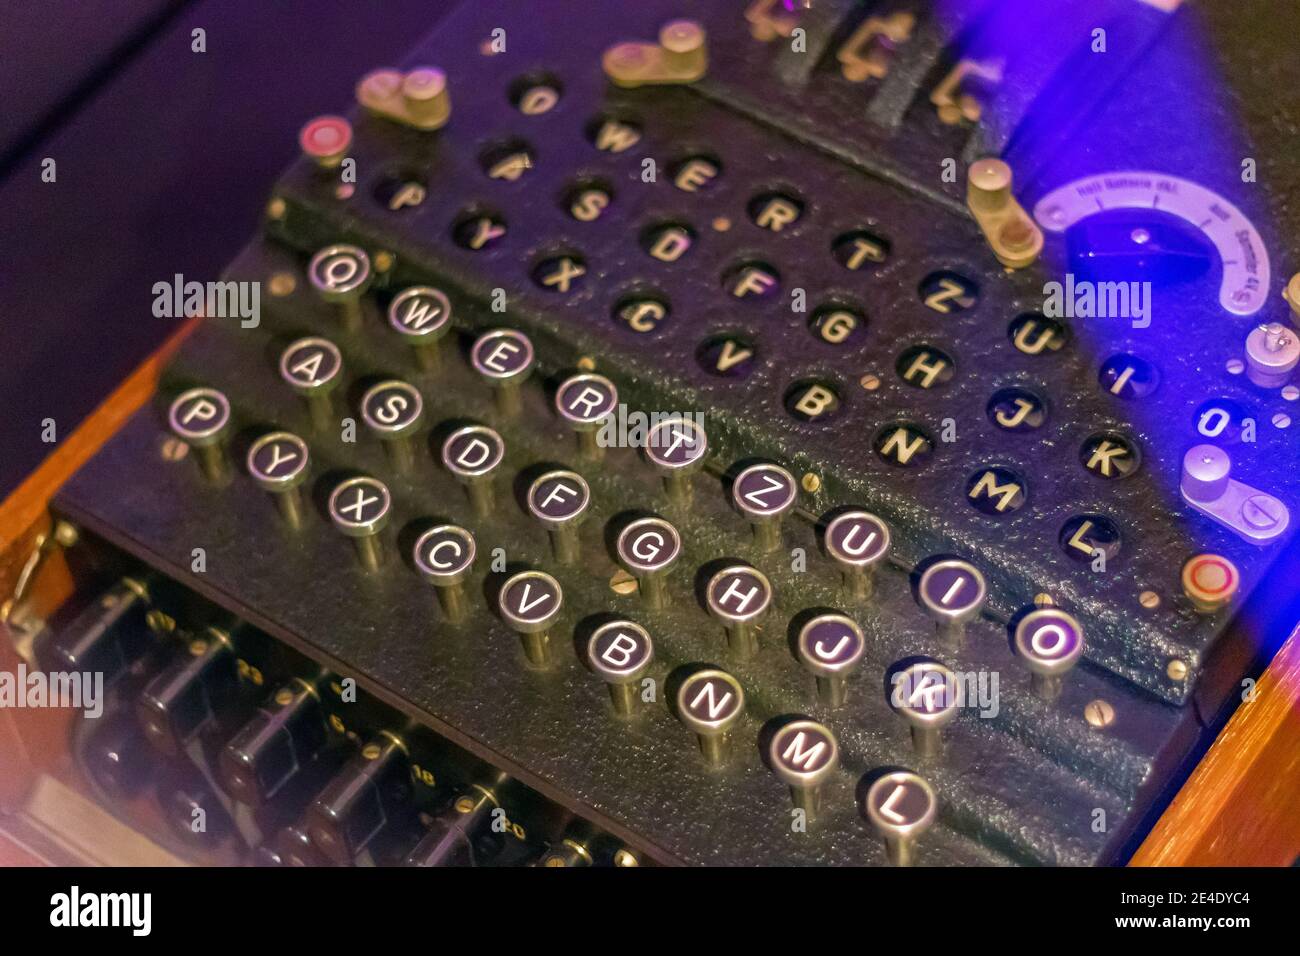 Military enigma machine on display at Science Museum in London Stock Photo